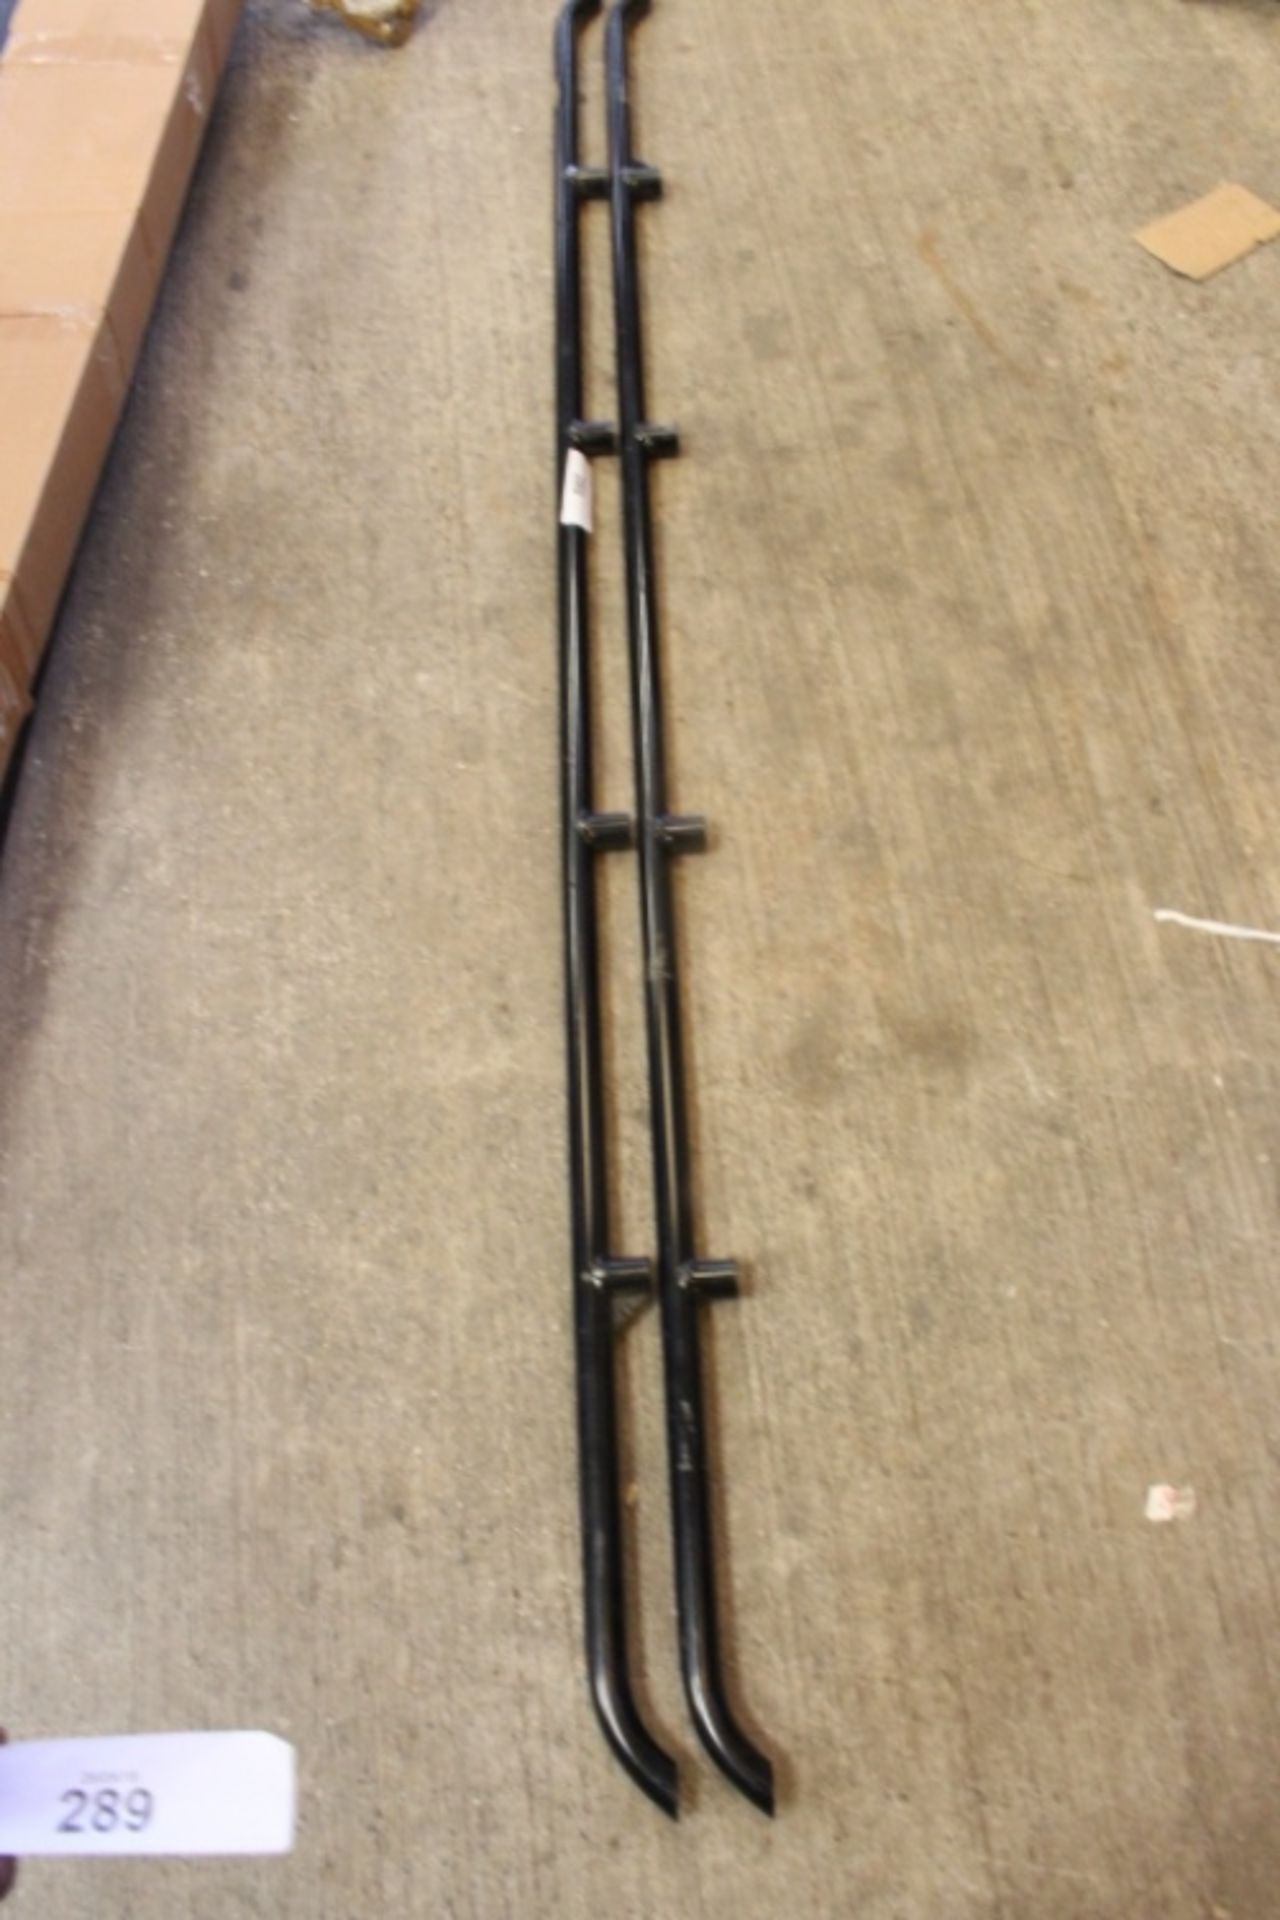 2 x Steel rails, unknown brand, unknown use, 210cm long, 6 mounting points - Used (AC1)